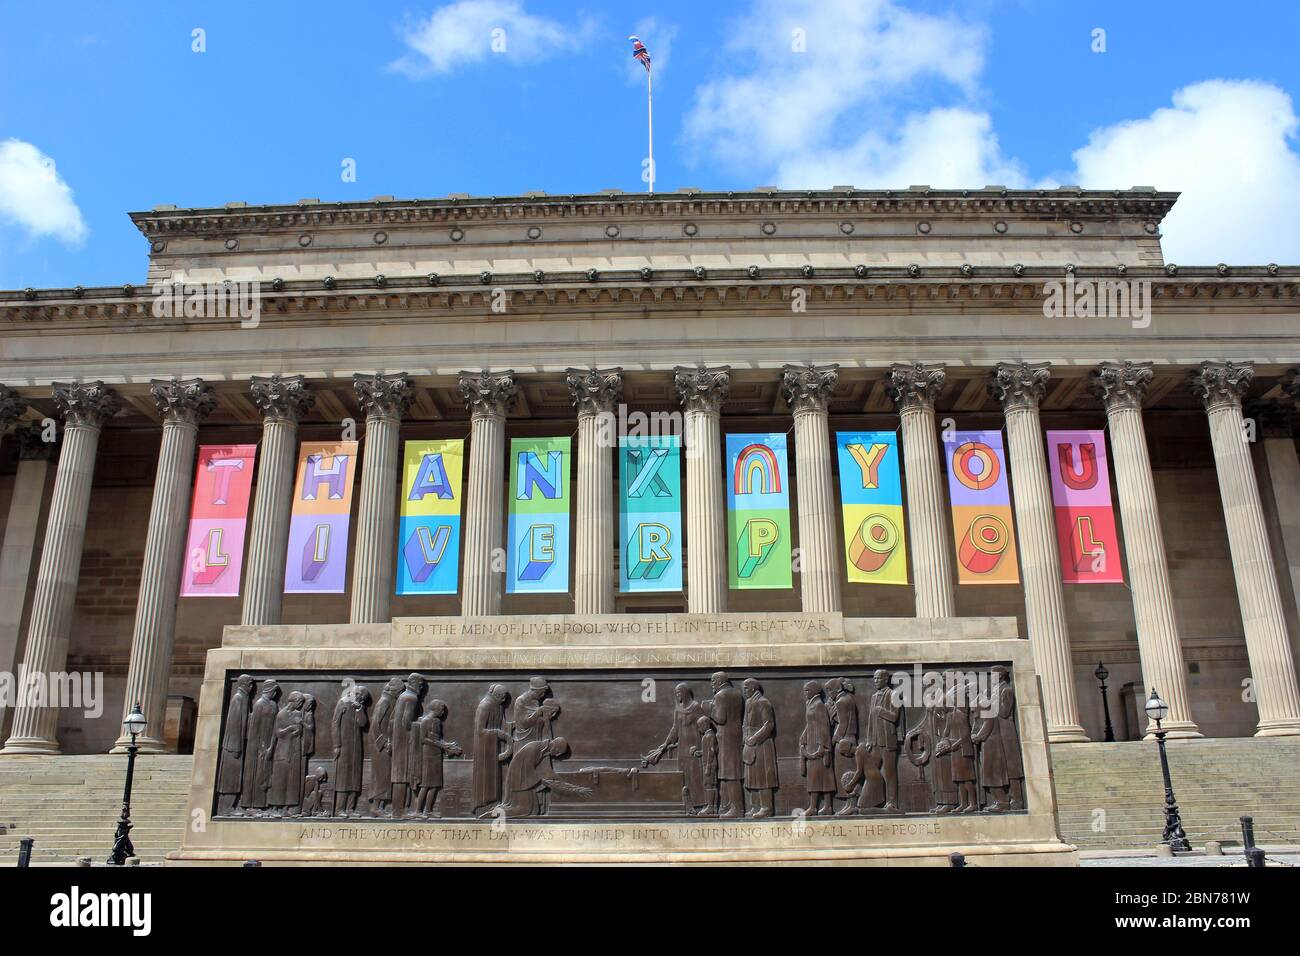 Thank You Liverpool Banners at St Georges Hall Liverpool amid The Covid 19 coronavirus Pandemic Stock Photo